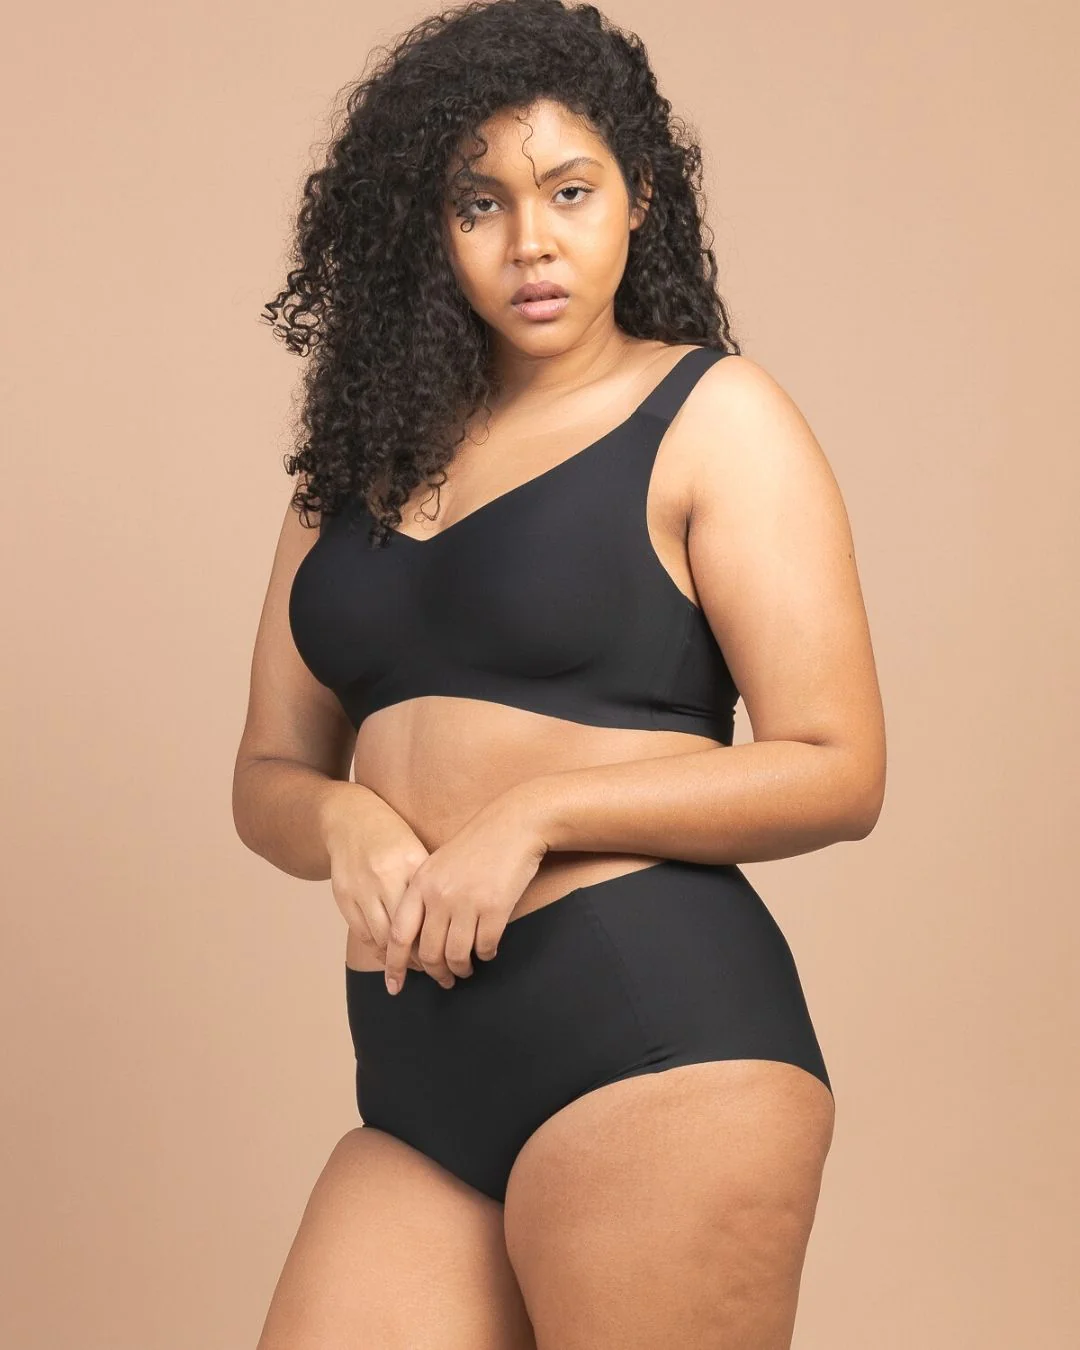 Feel Beautiful and Confident in Our Supportive Plus Size Lingerie!